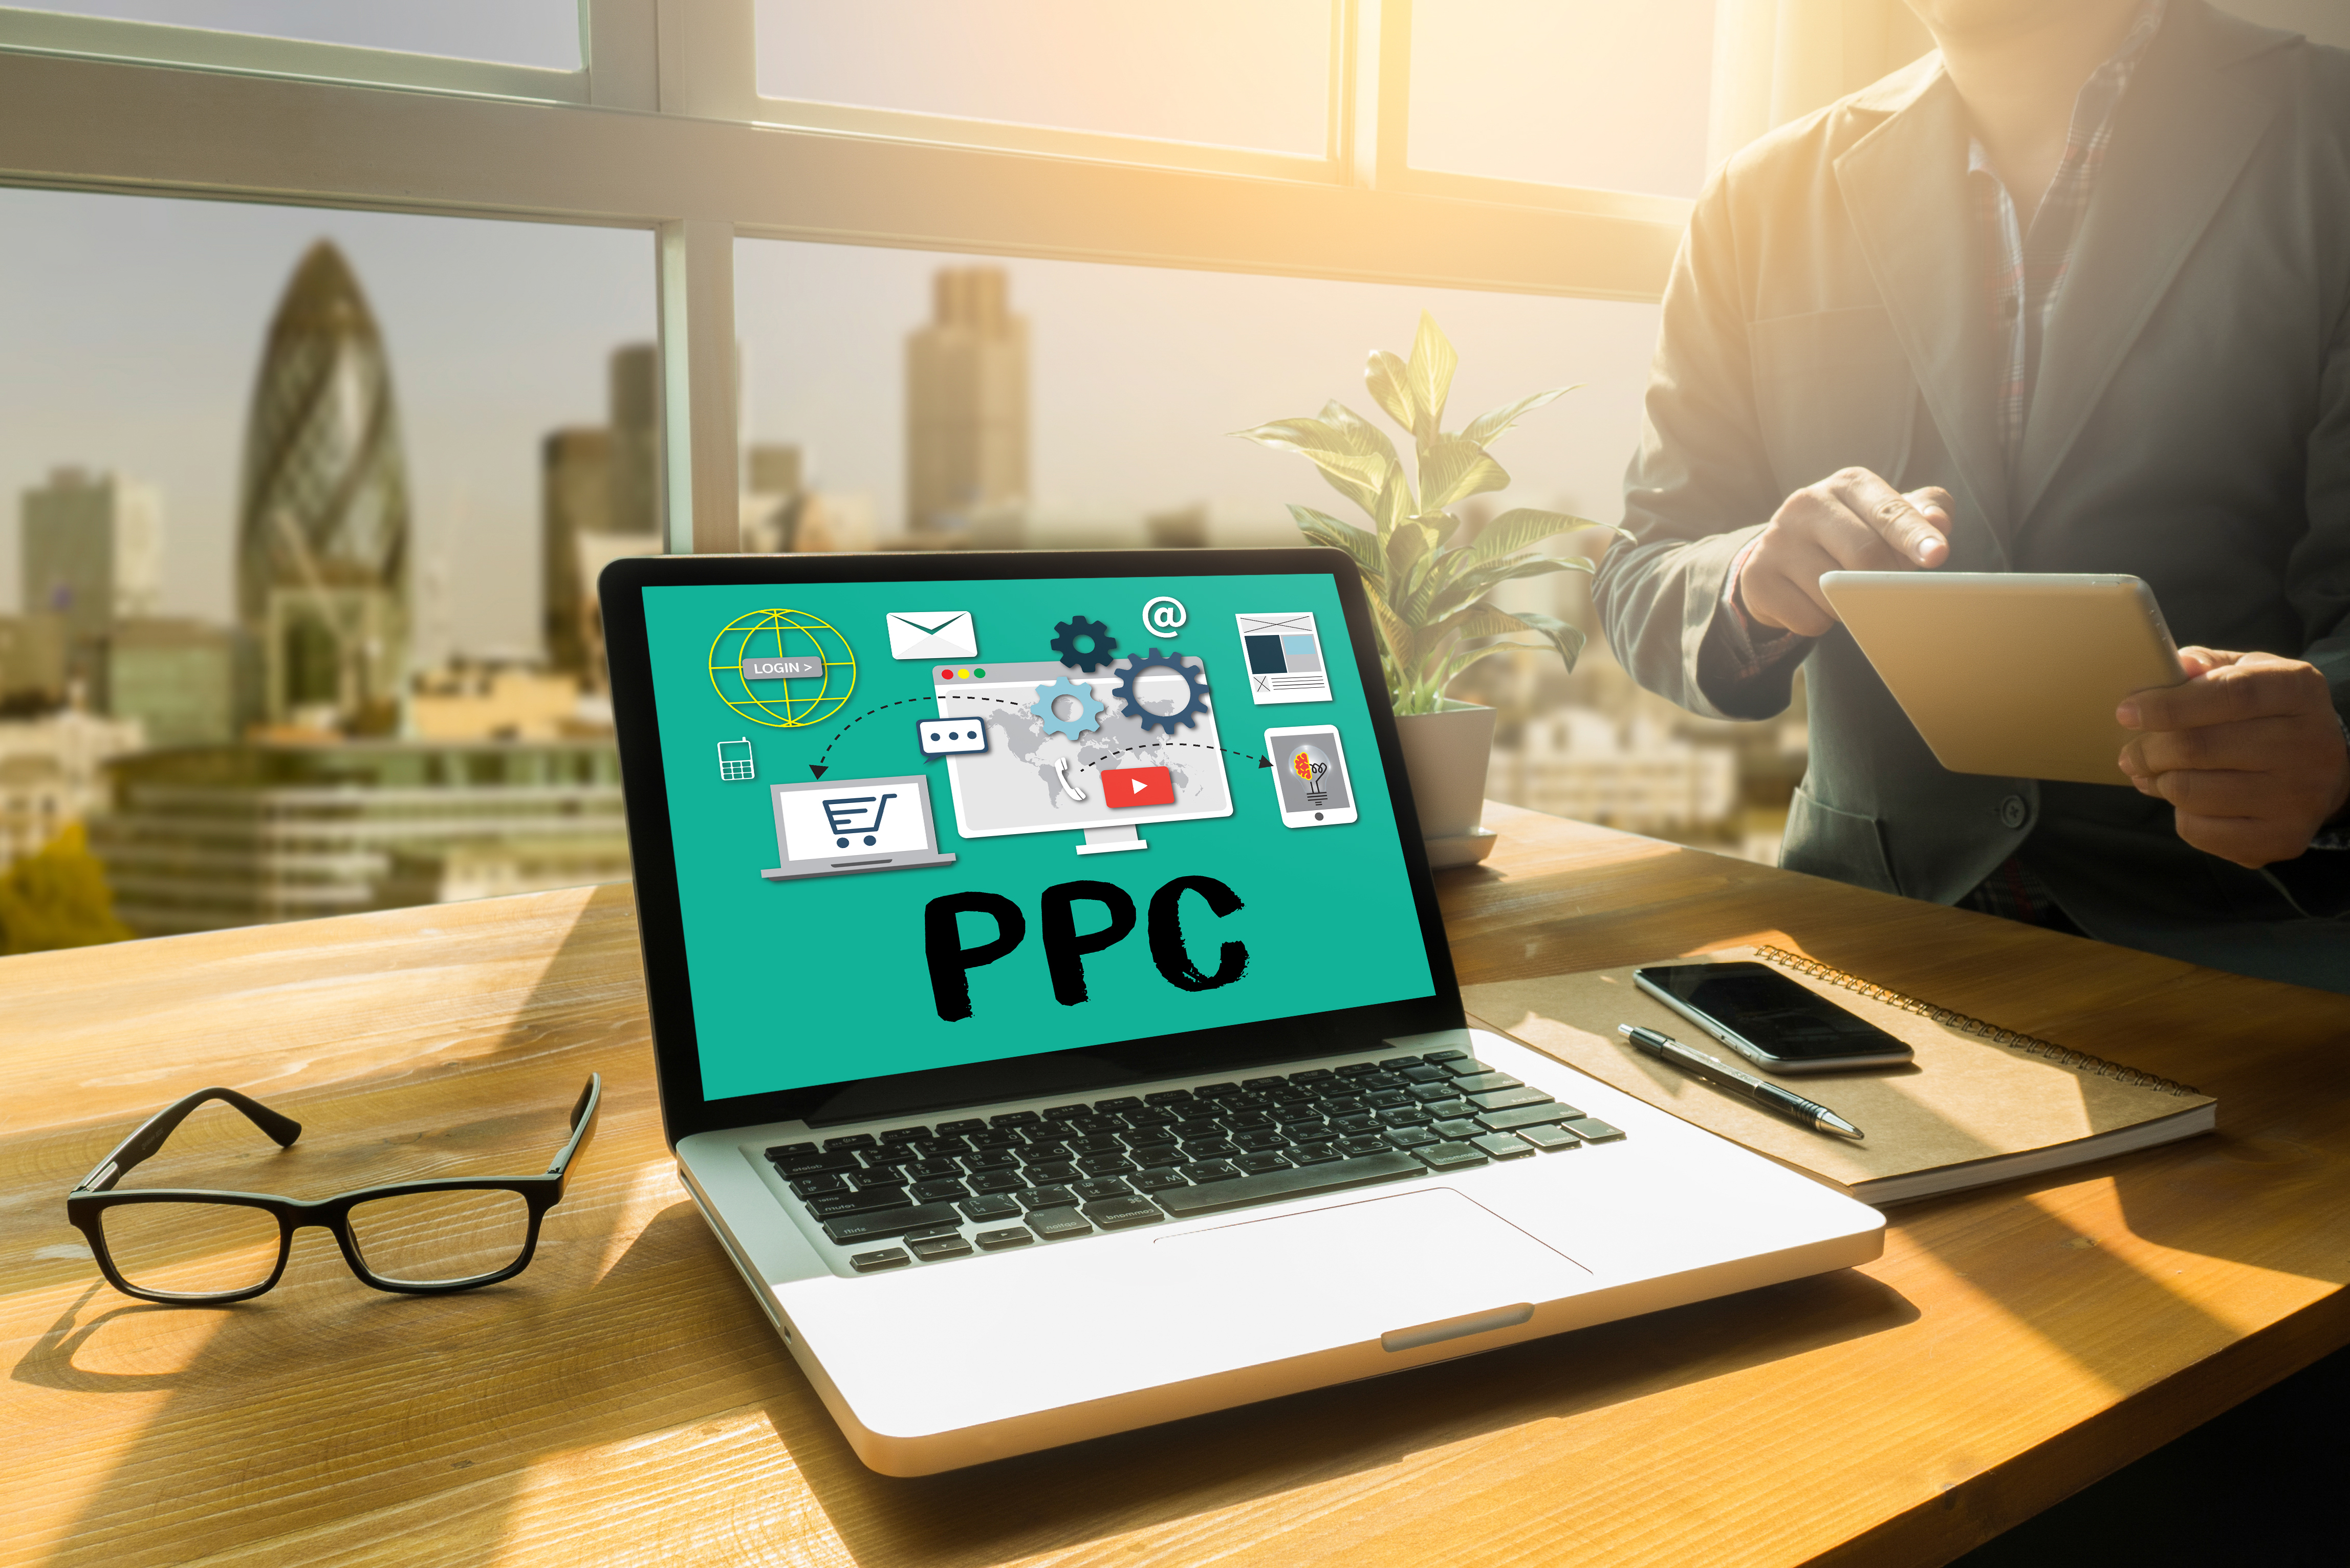 Tools for Better PPC campaigns